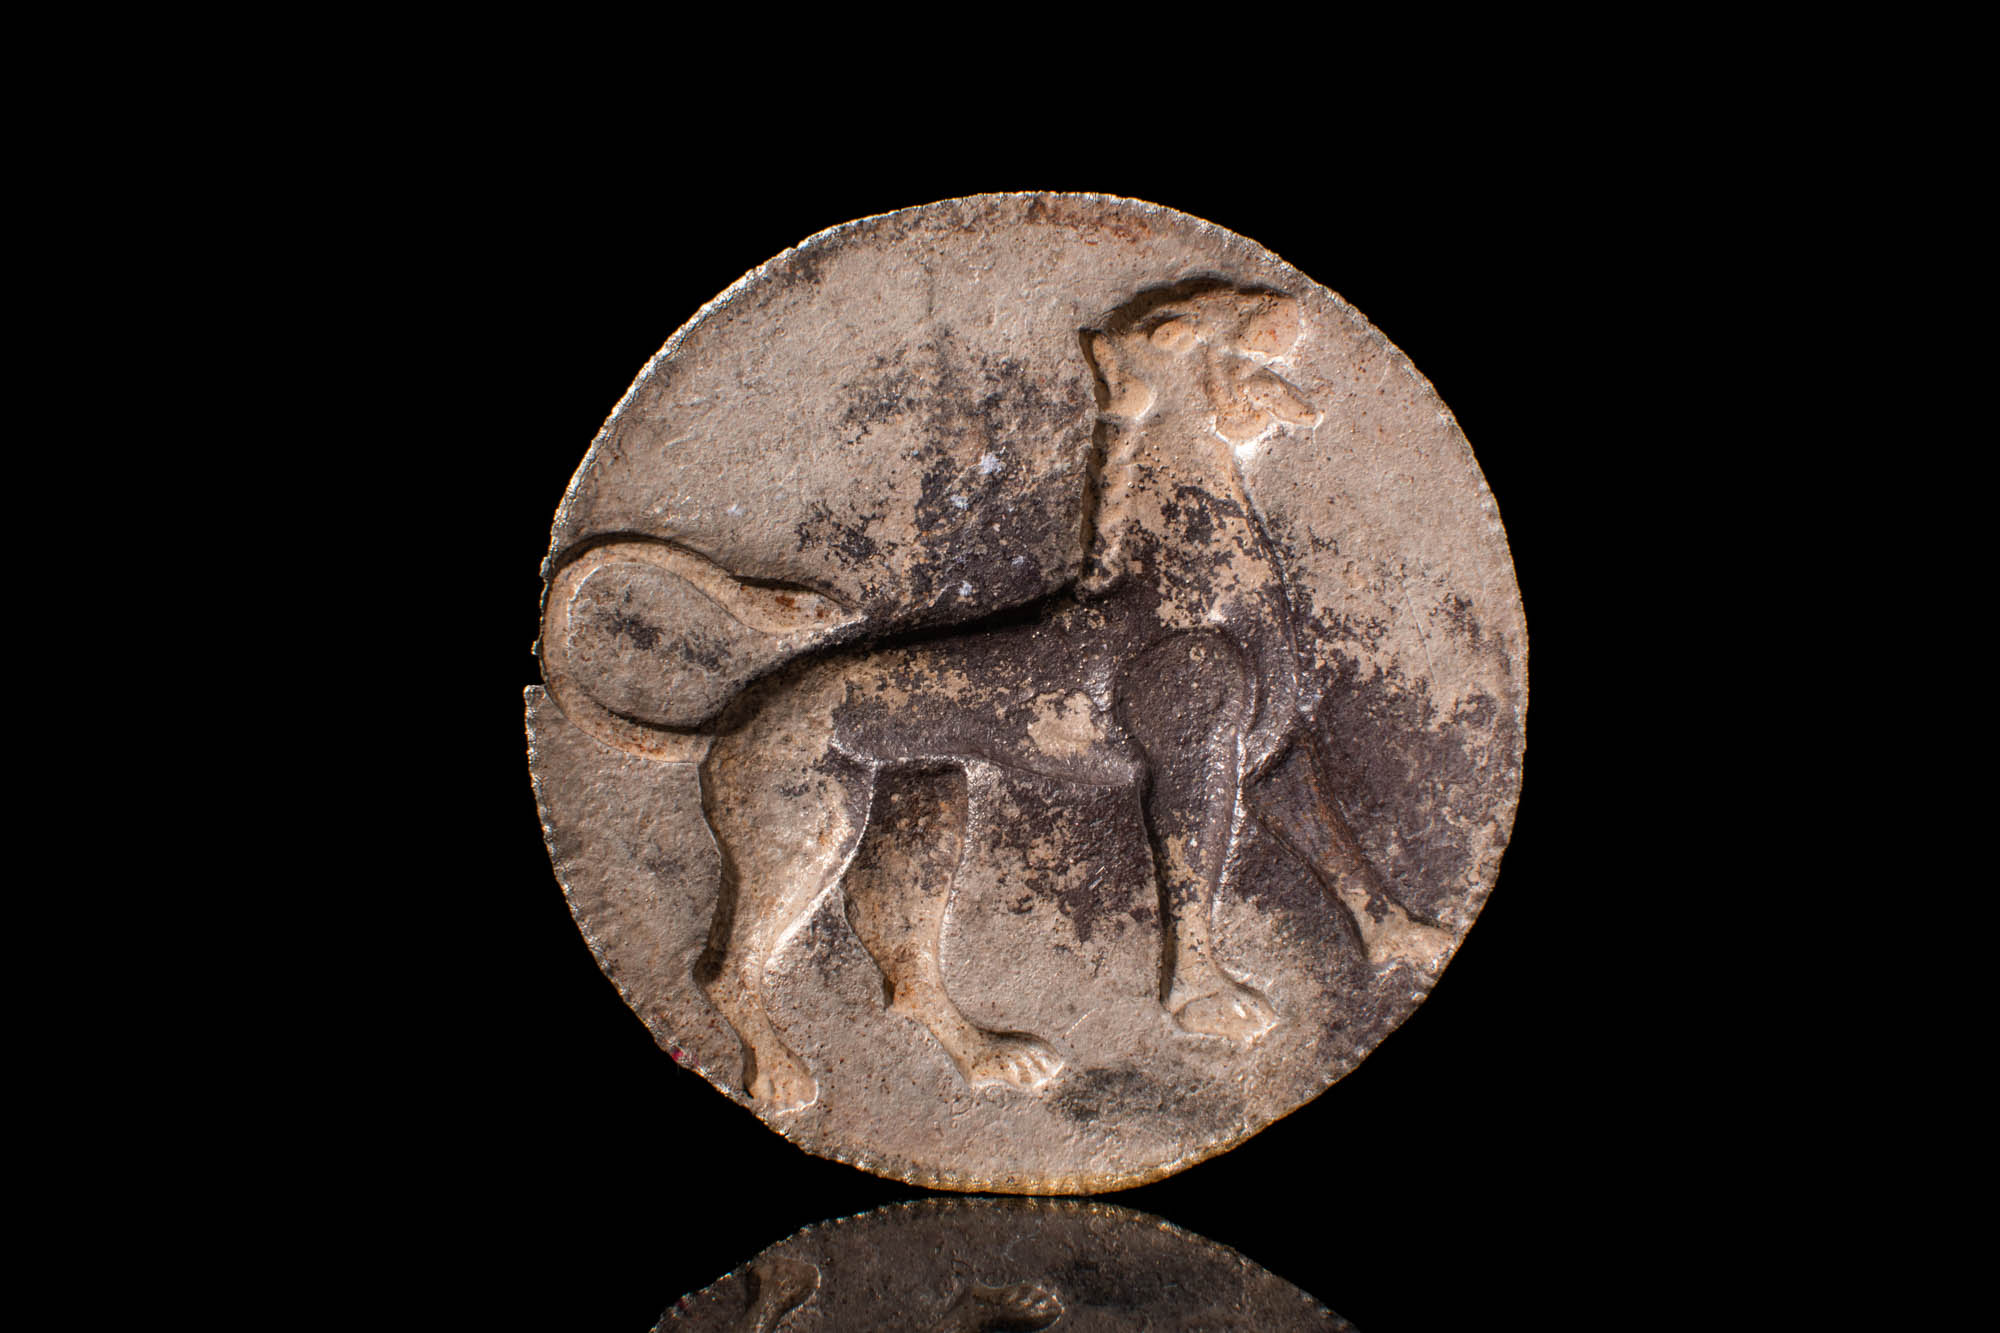 IRON AGE SILVER GILDED APPLIQUE DEPICTING A ROARING LION - Image 3 of 3